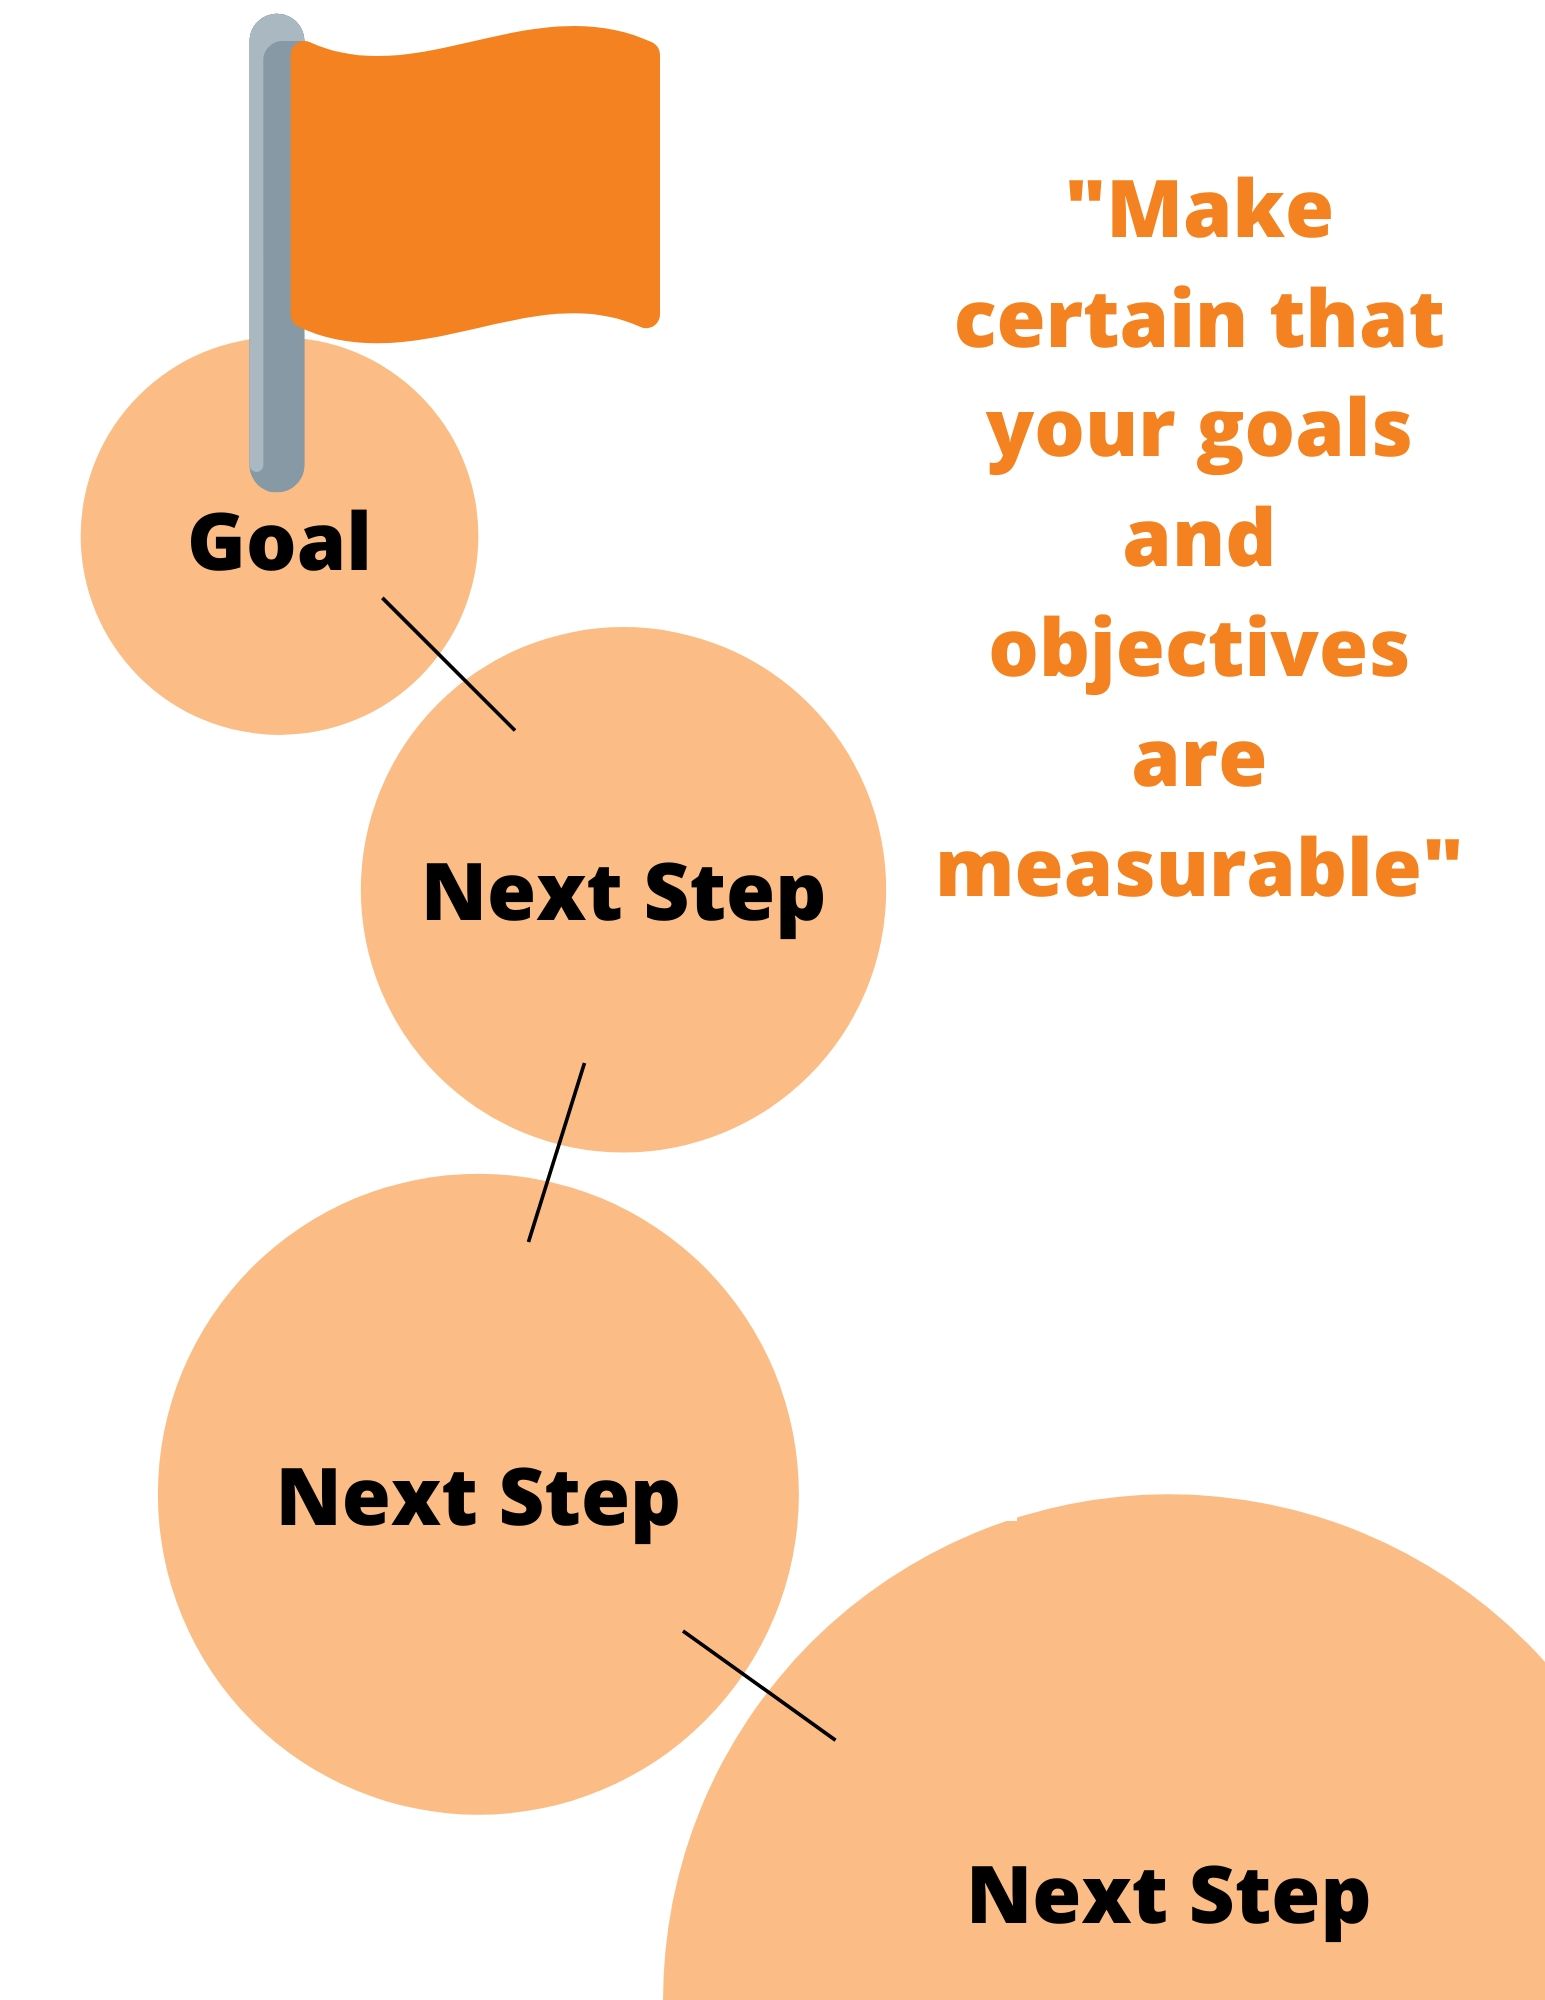 make certain that your goals and objectives are measurable